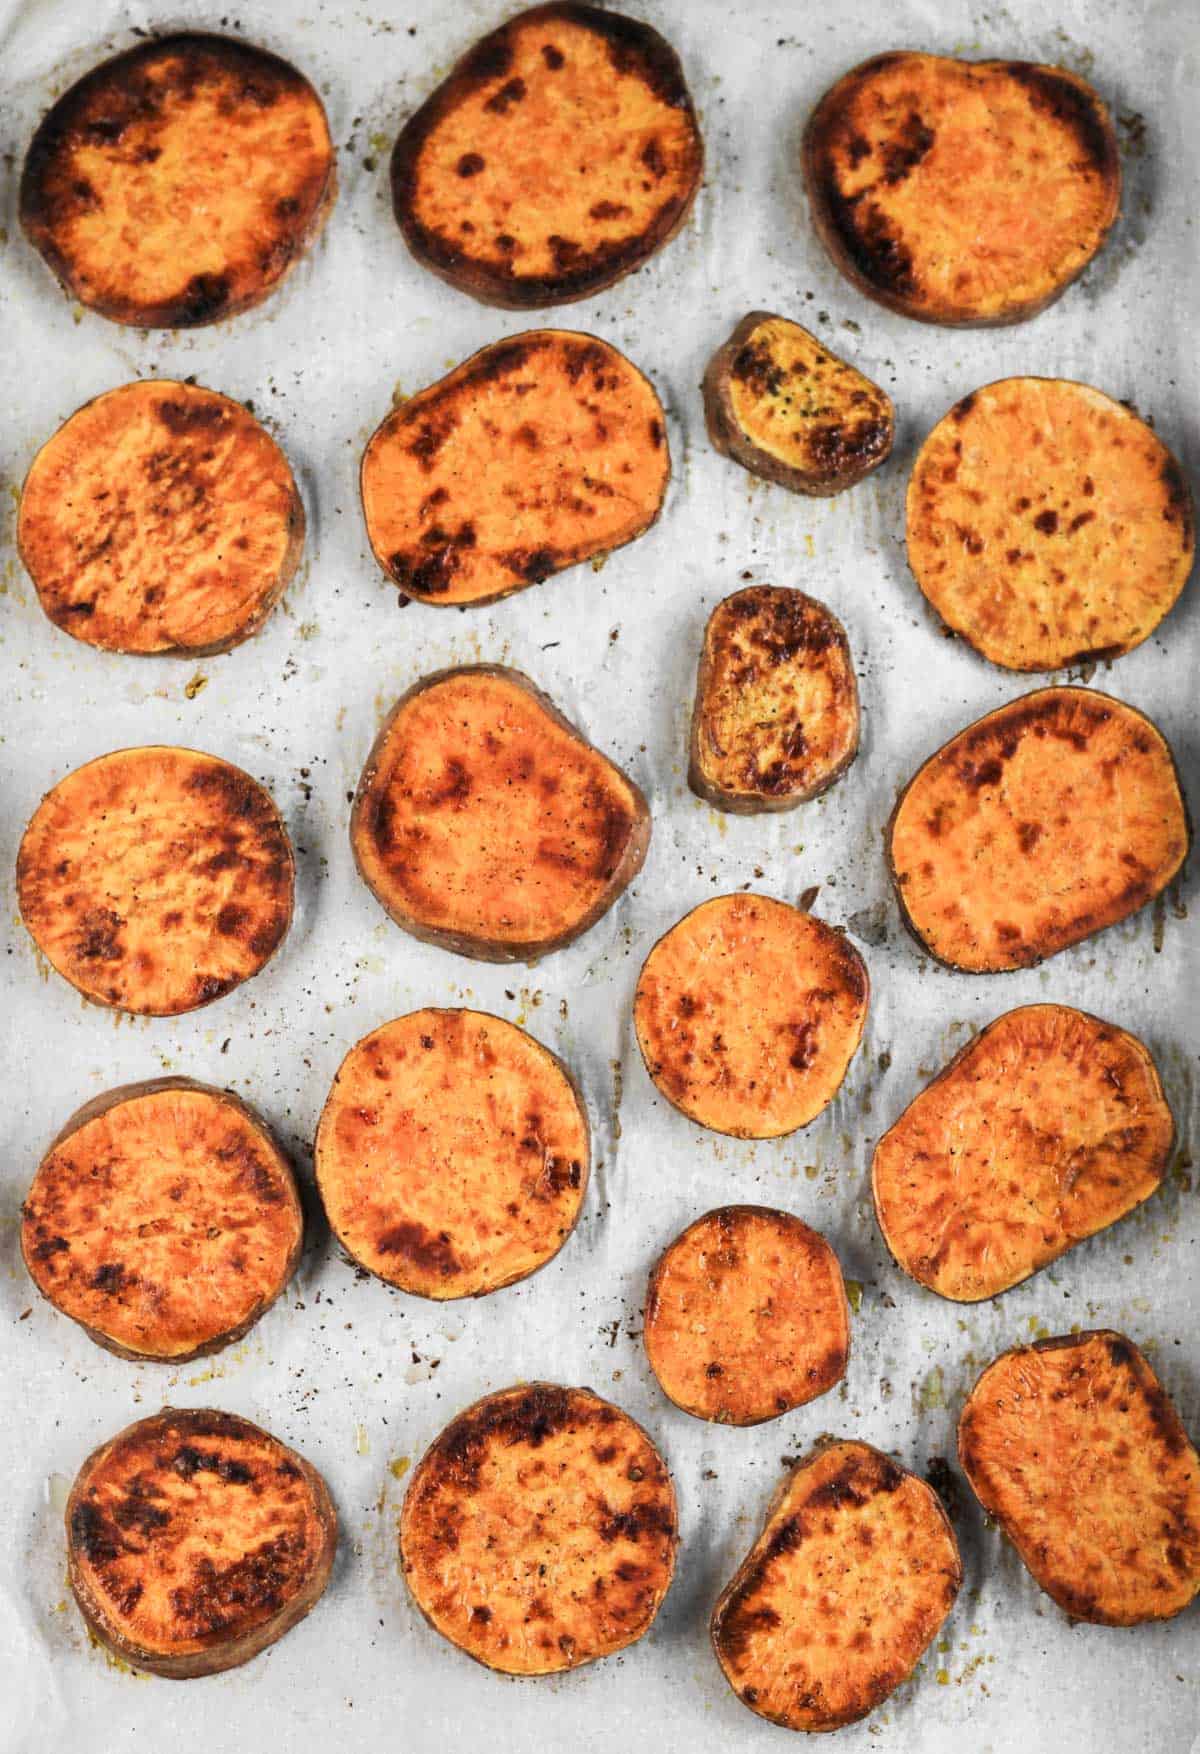 Roasted sweet potato slices on a parchment-lined sheet pan.